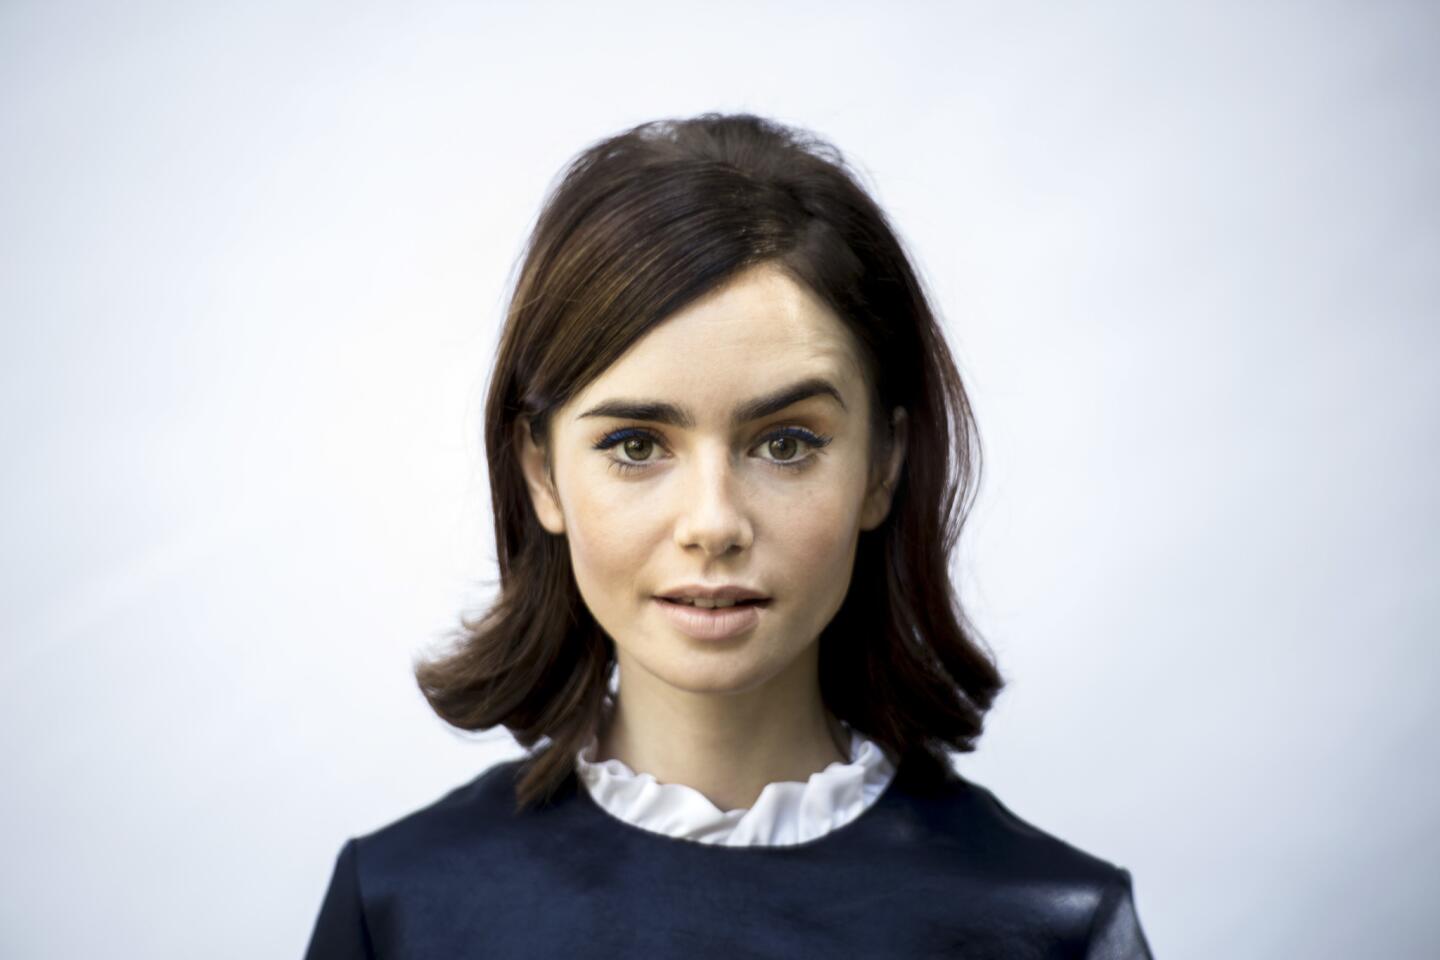 Celebrity portraits by The Times | Lily Collins